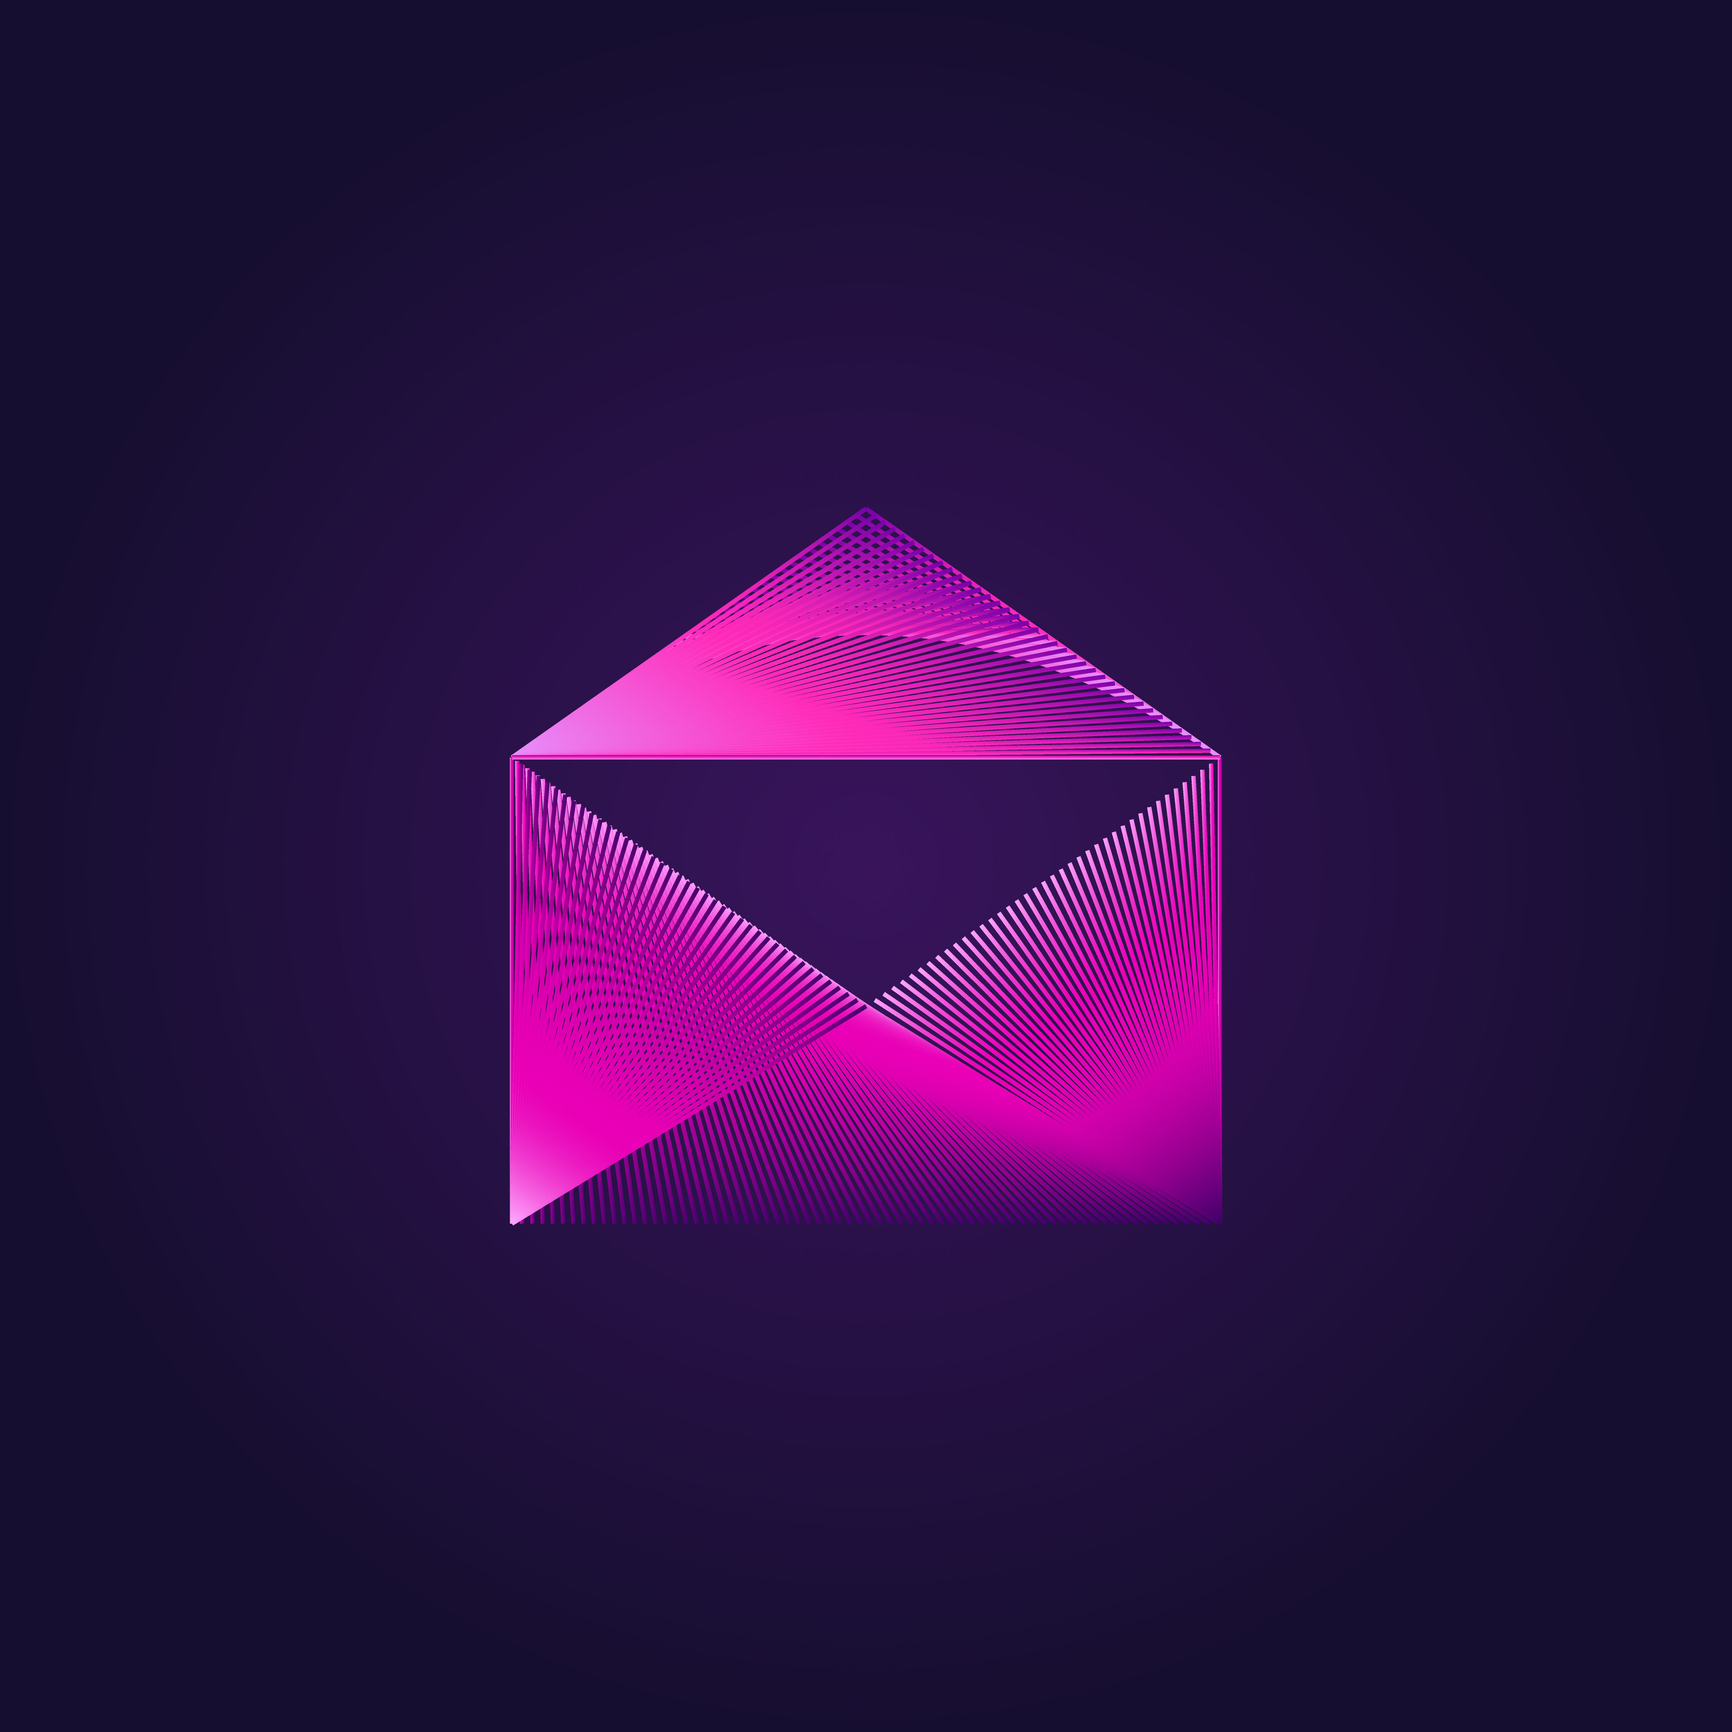 Abstract envelope icon design neon colored